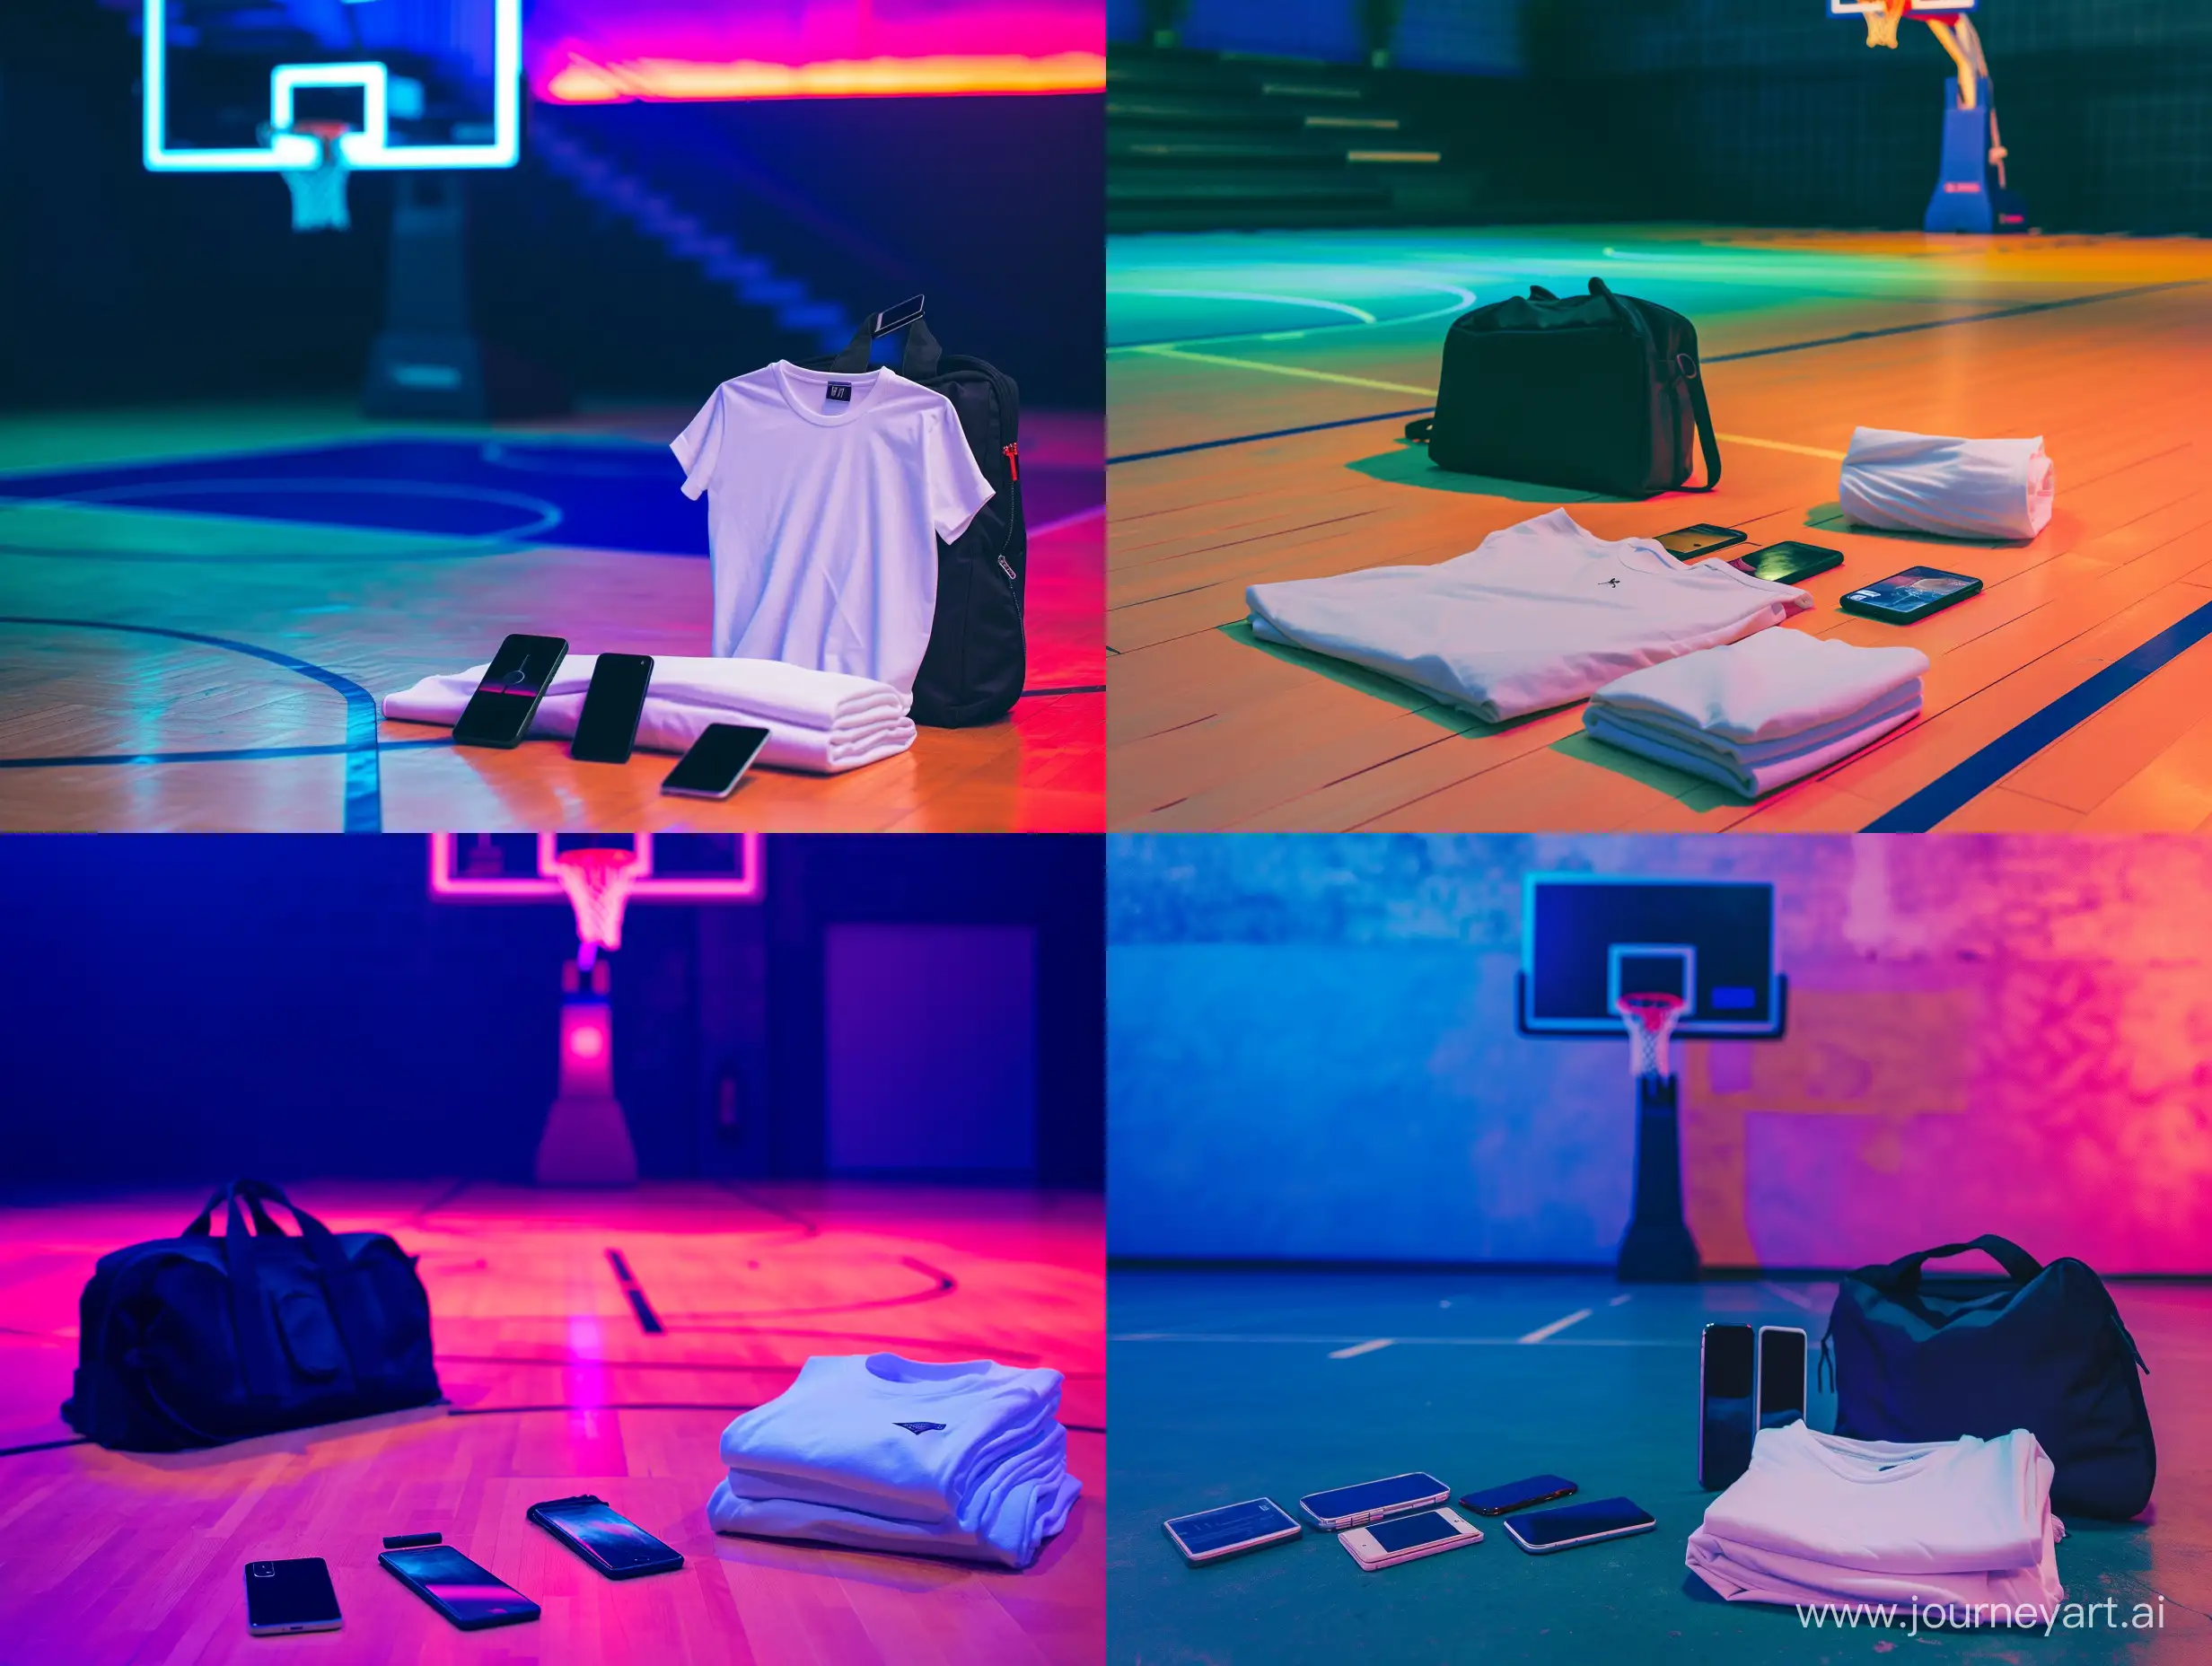 On the right side of the image folded white t-shirt, mobile phones and black sports bag on a basketball court. Basketball hoop in the background. All in neon colors. From a distance.
